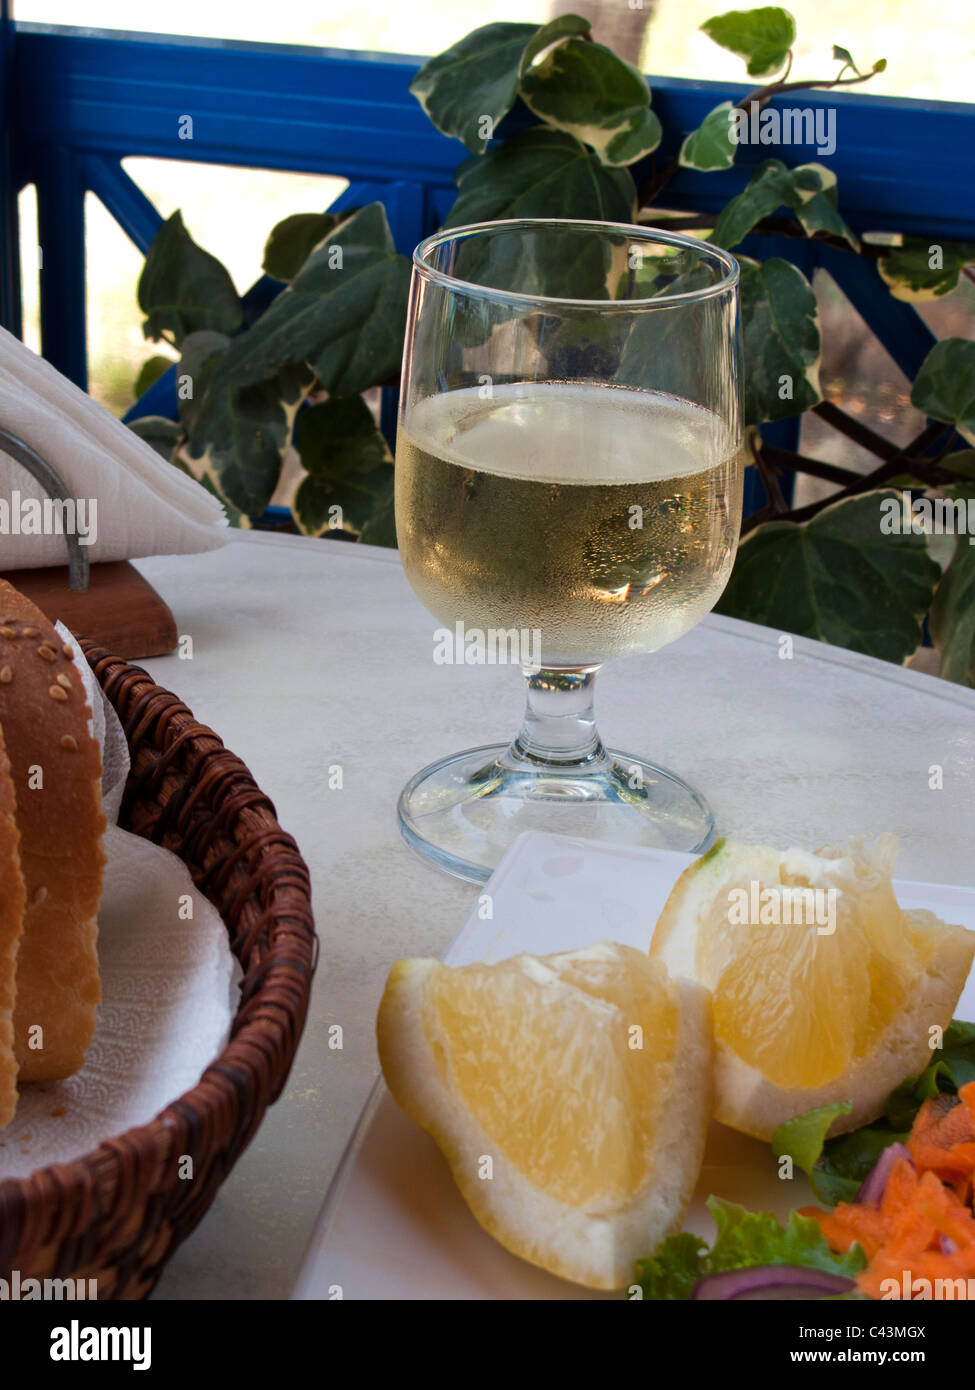 SELECTIVE FOCUS IMAGE OF A WHITE WINE GLASS IN A RESTAURANT OUTDOORS IN GREECE Stock Photo